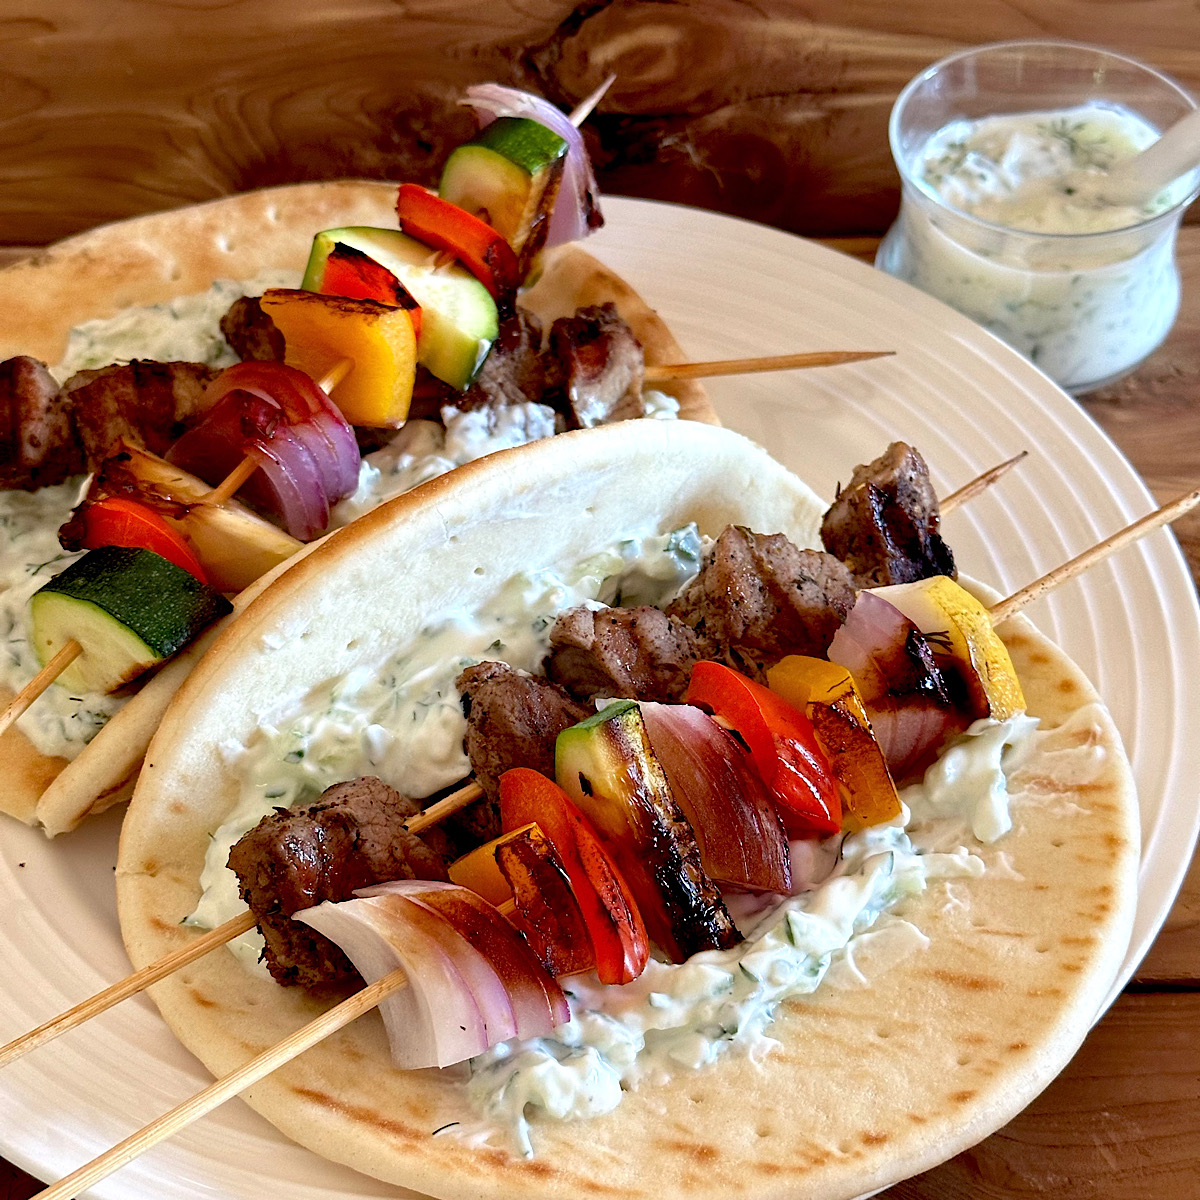 Pita sandwich with pork and vegetable kabobs.